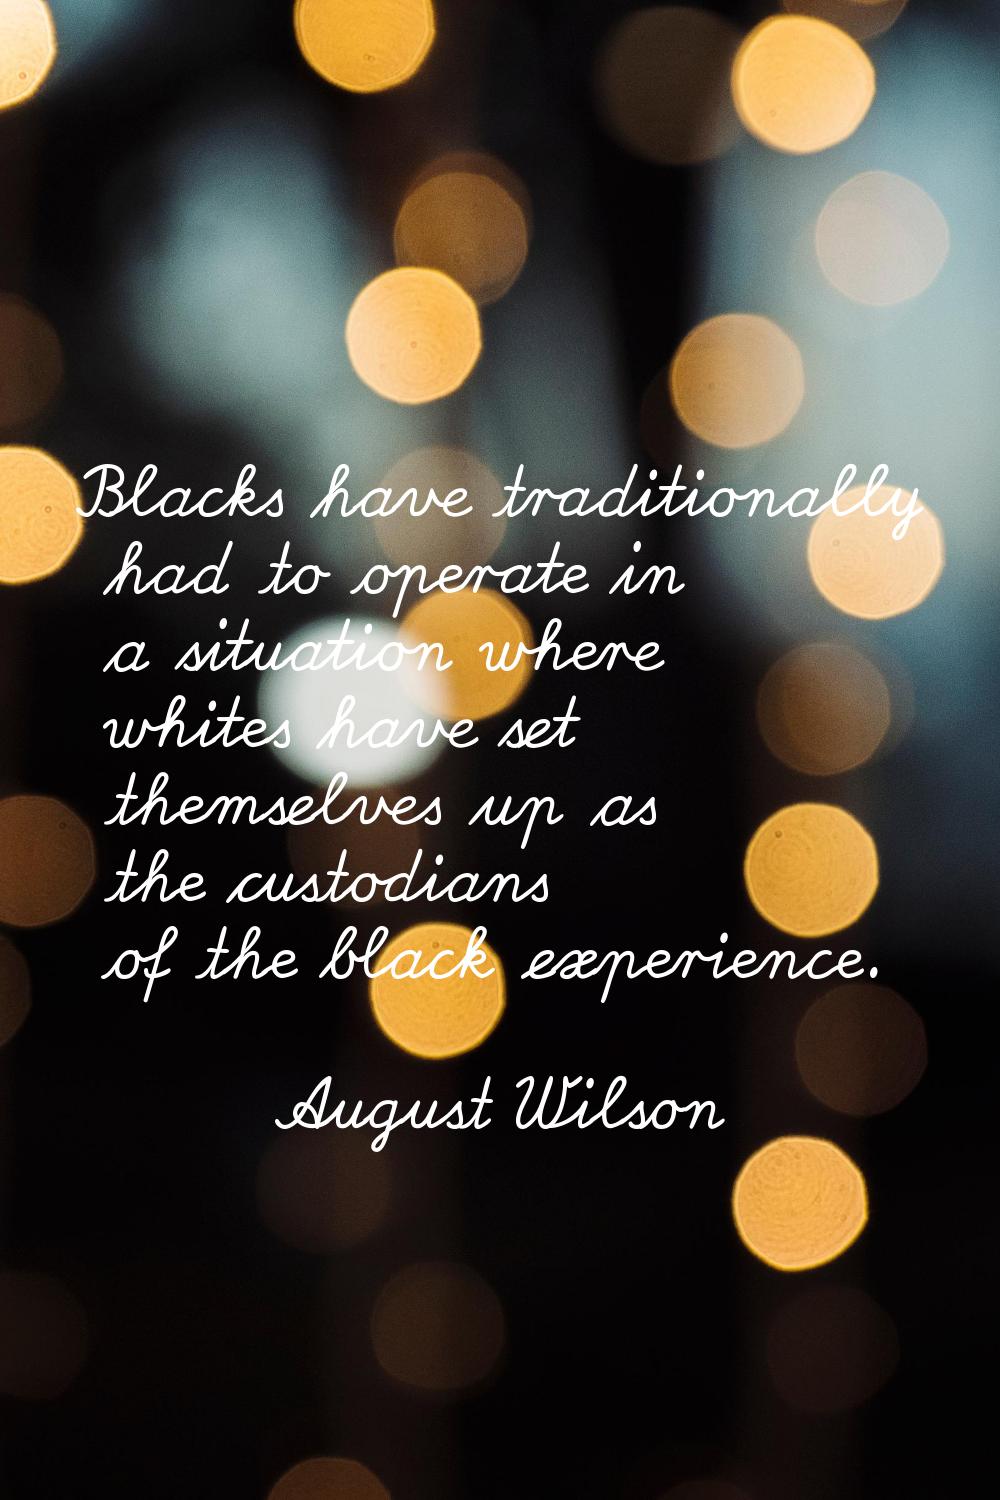 Blacks have traditionally had to operate in a situation where whites have set themselves up as the 